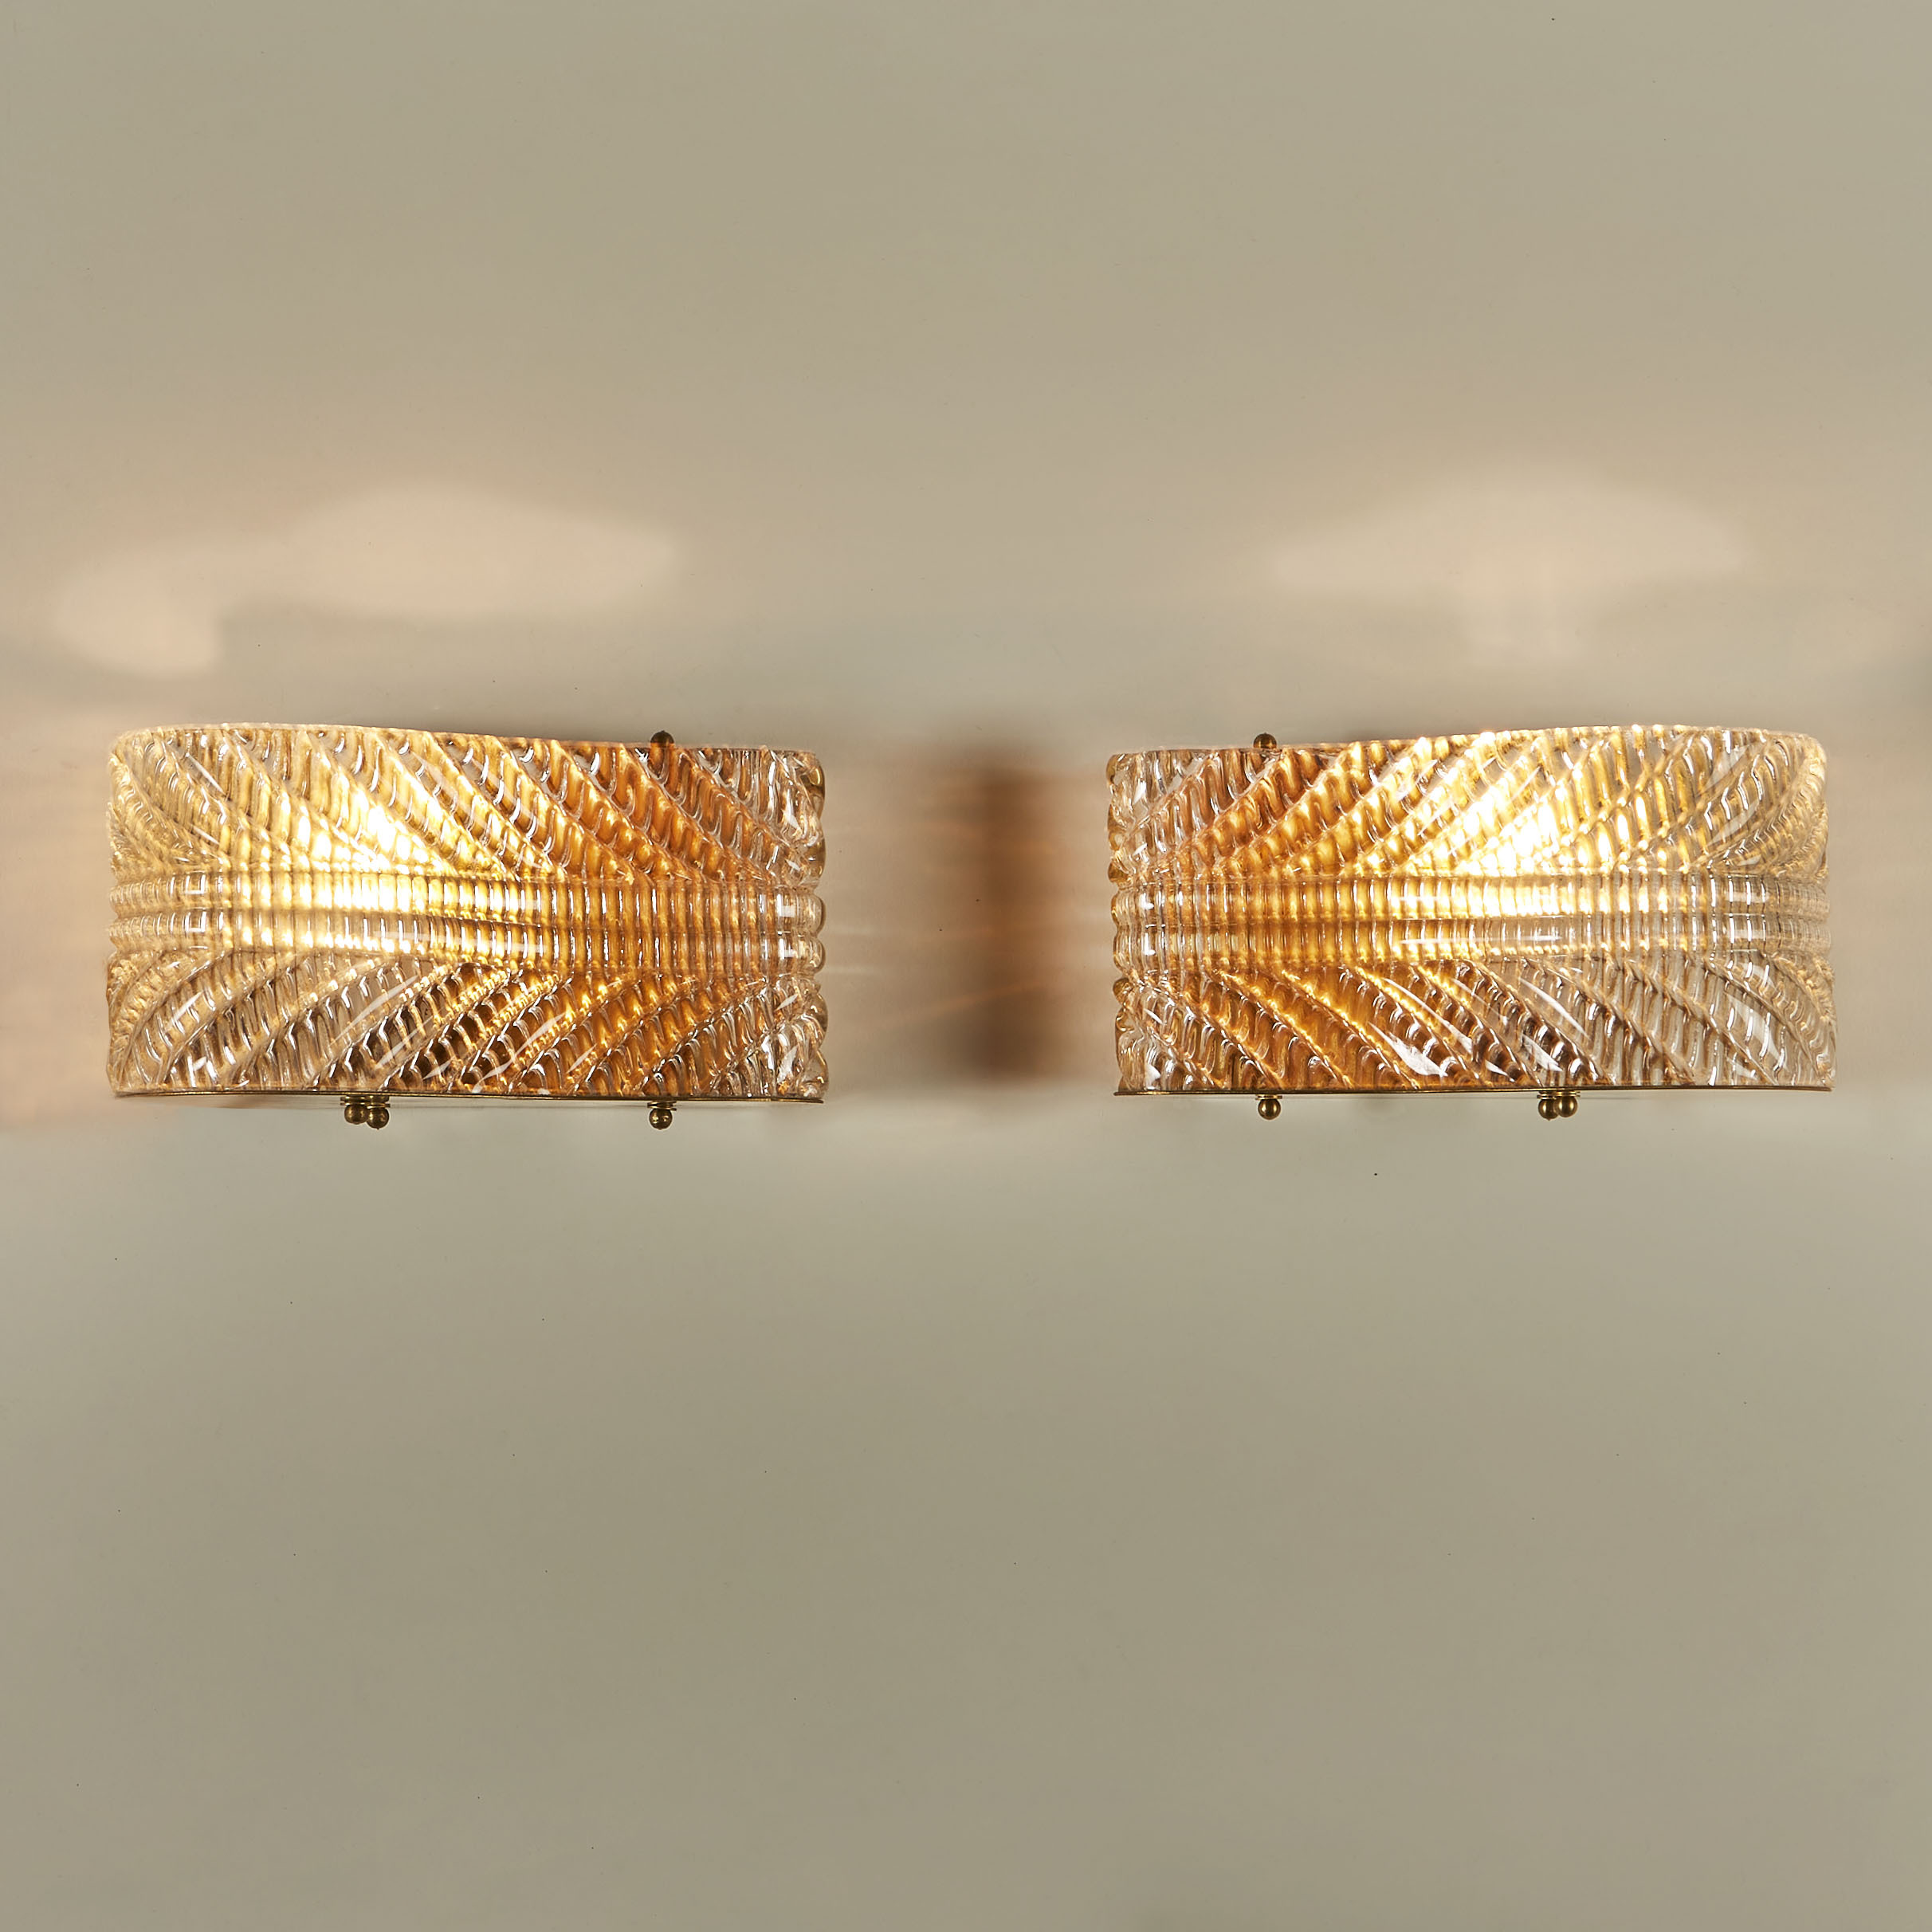 The image for Italian Curved Wall Lights 177 V1